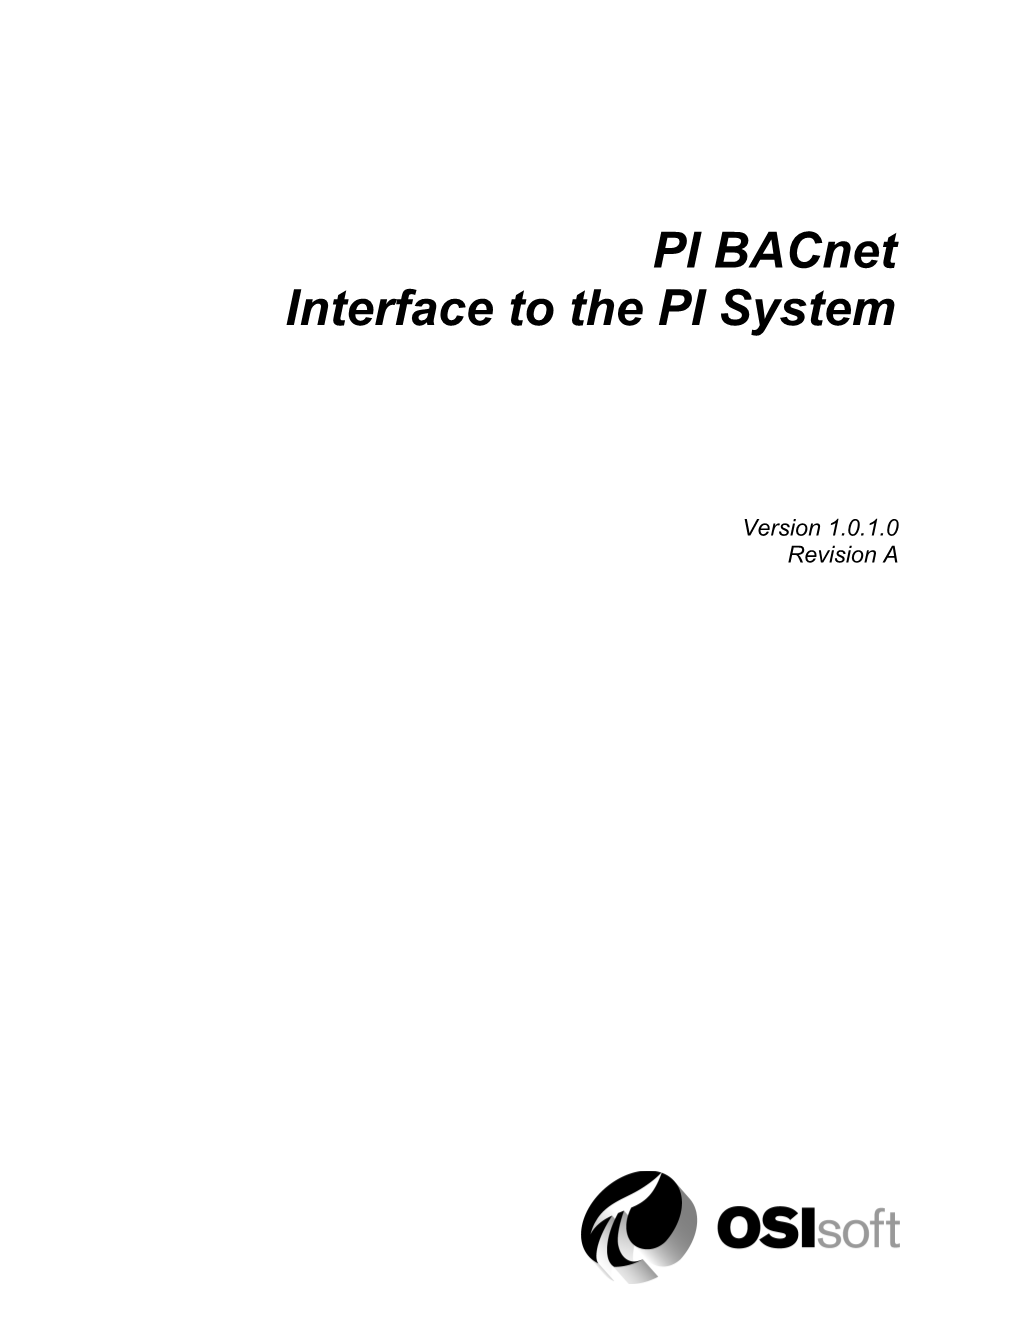 PI Bacnet Interface to the PI System